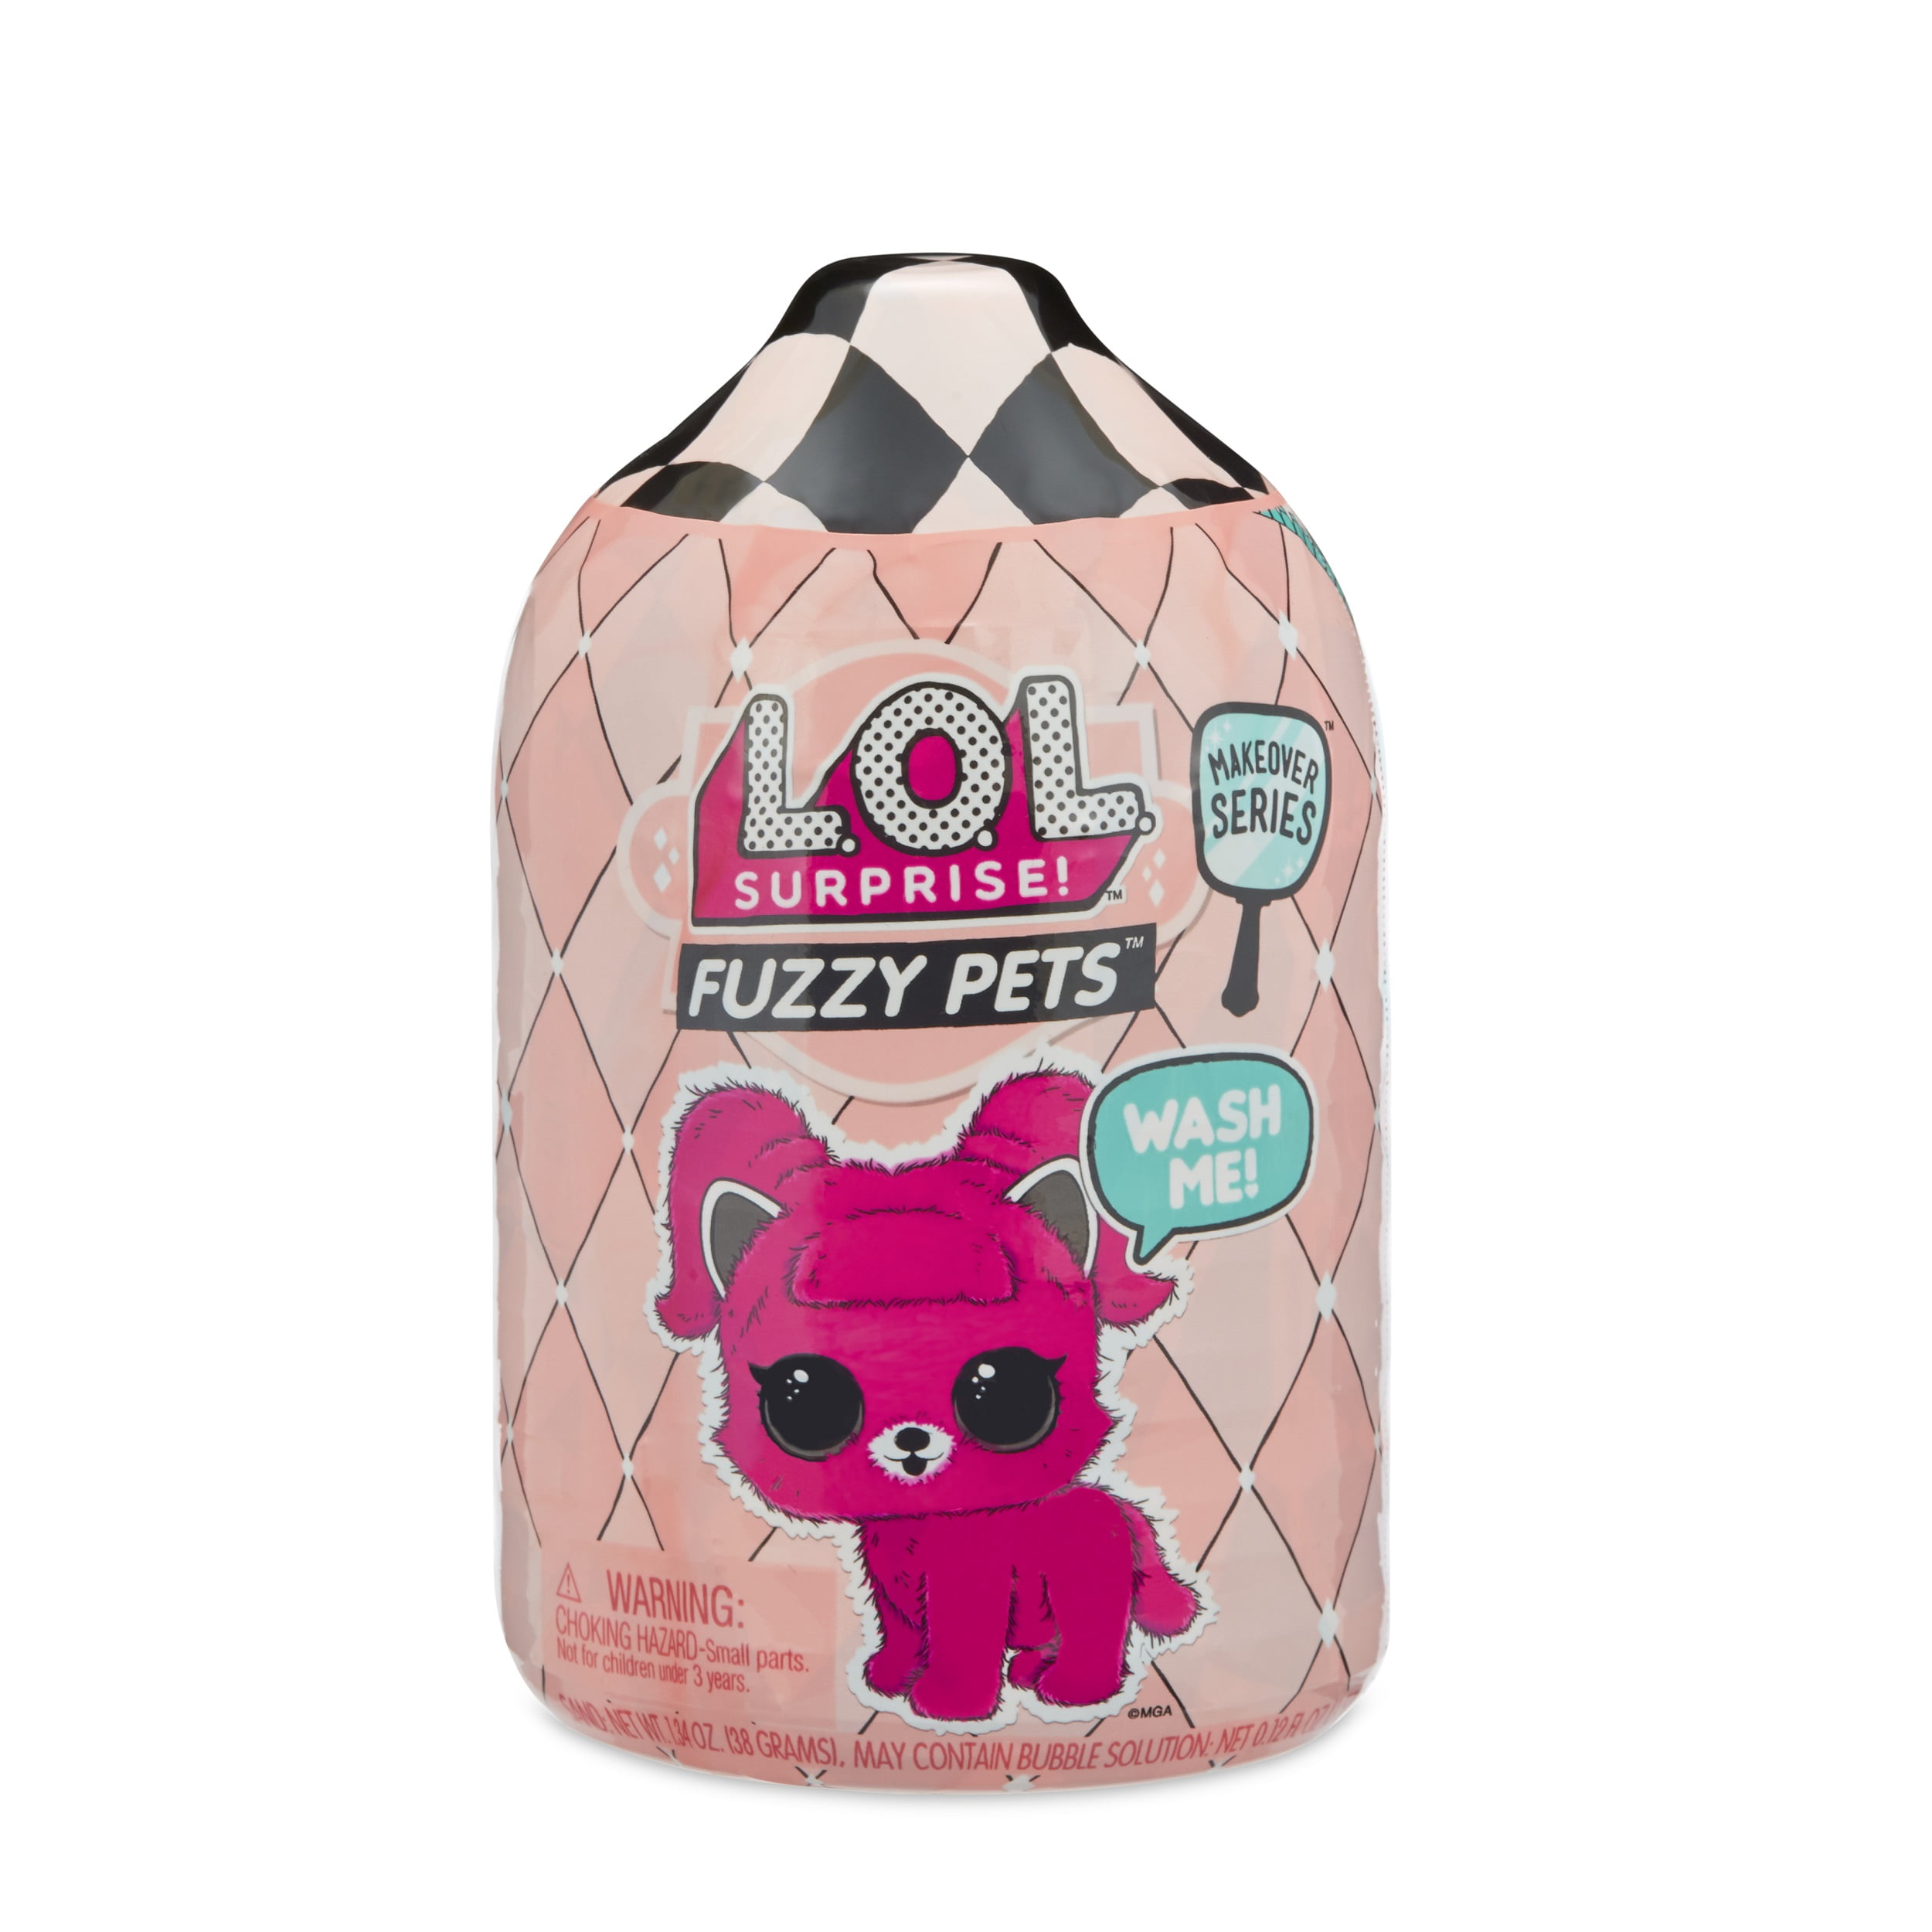 Lol Surprise Doll Makeover Series 5 Fuzzy Pets PLAYED NO FUZZY Xmas Toy Gift 